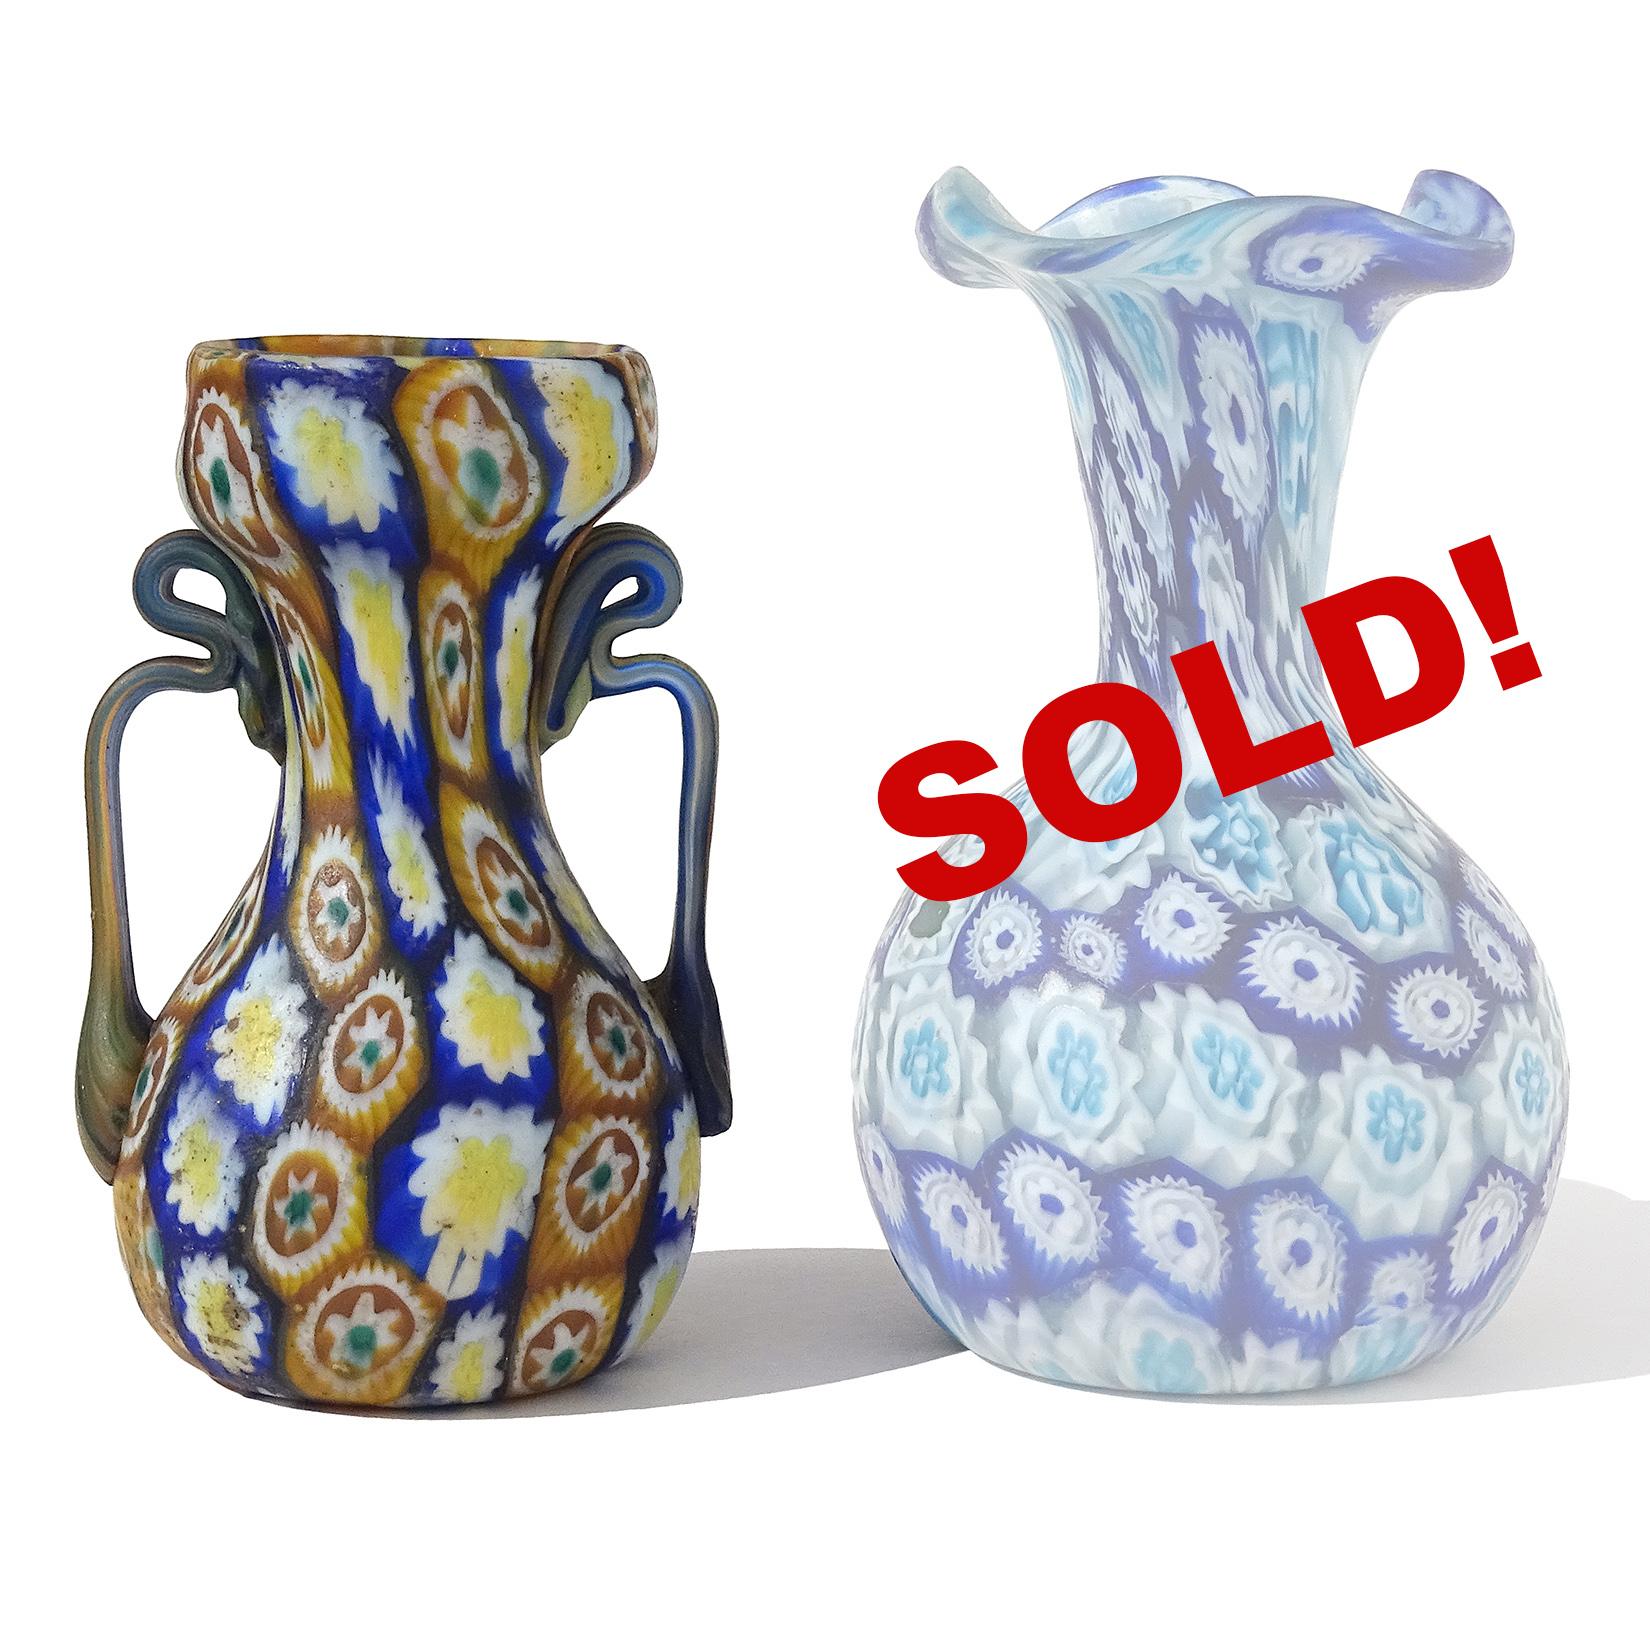 ONLY 1 Left! Beautiful antique Murano hand blown millefiori mosaic Italian art glass decorative cabinet vase. Documented to the Fratelli Toso company, circa 1910-1930. The vase has orange, yellow, white and blue flowers, with ornate handles.